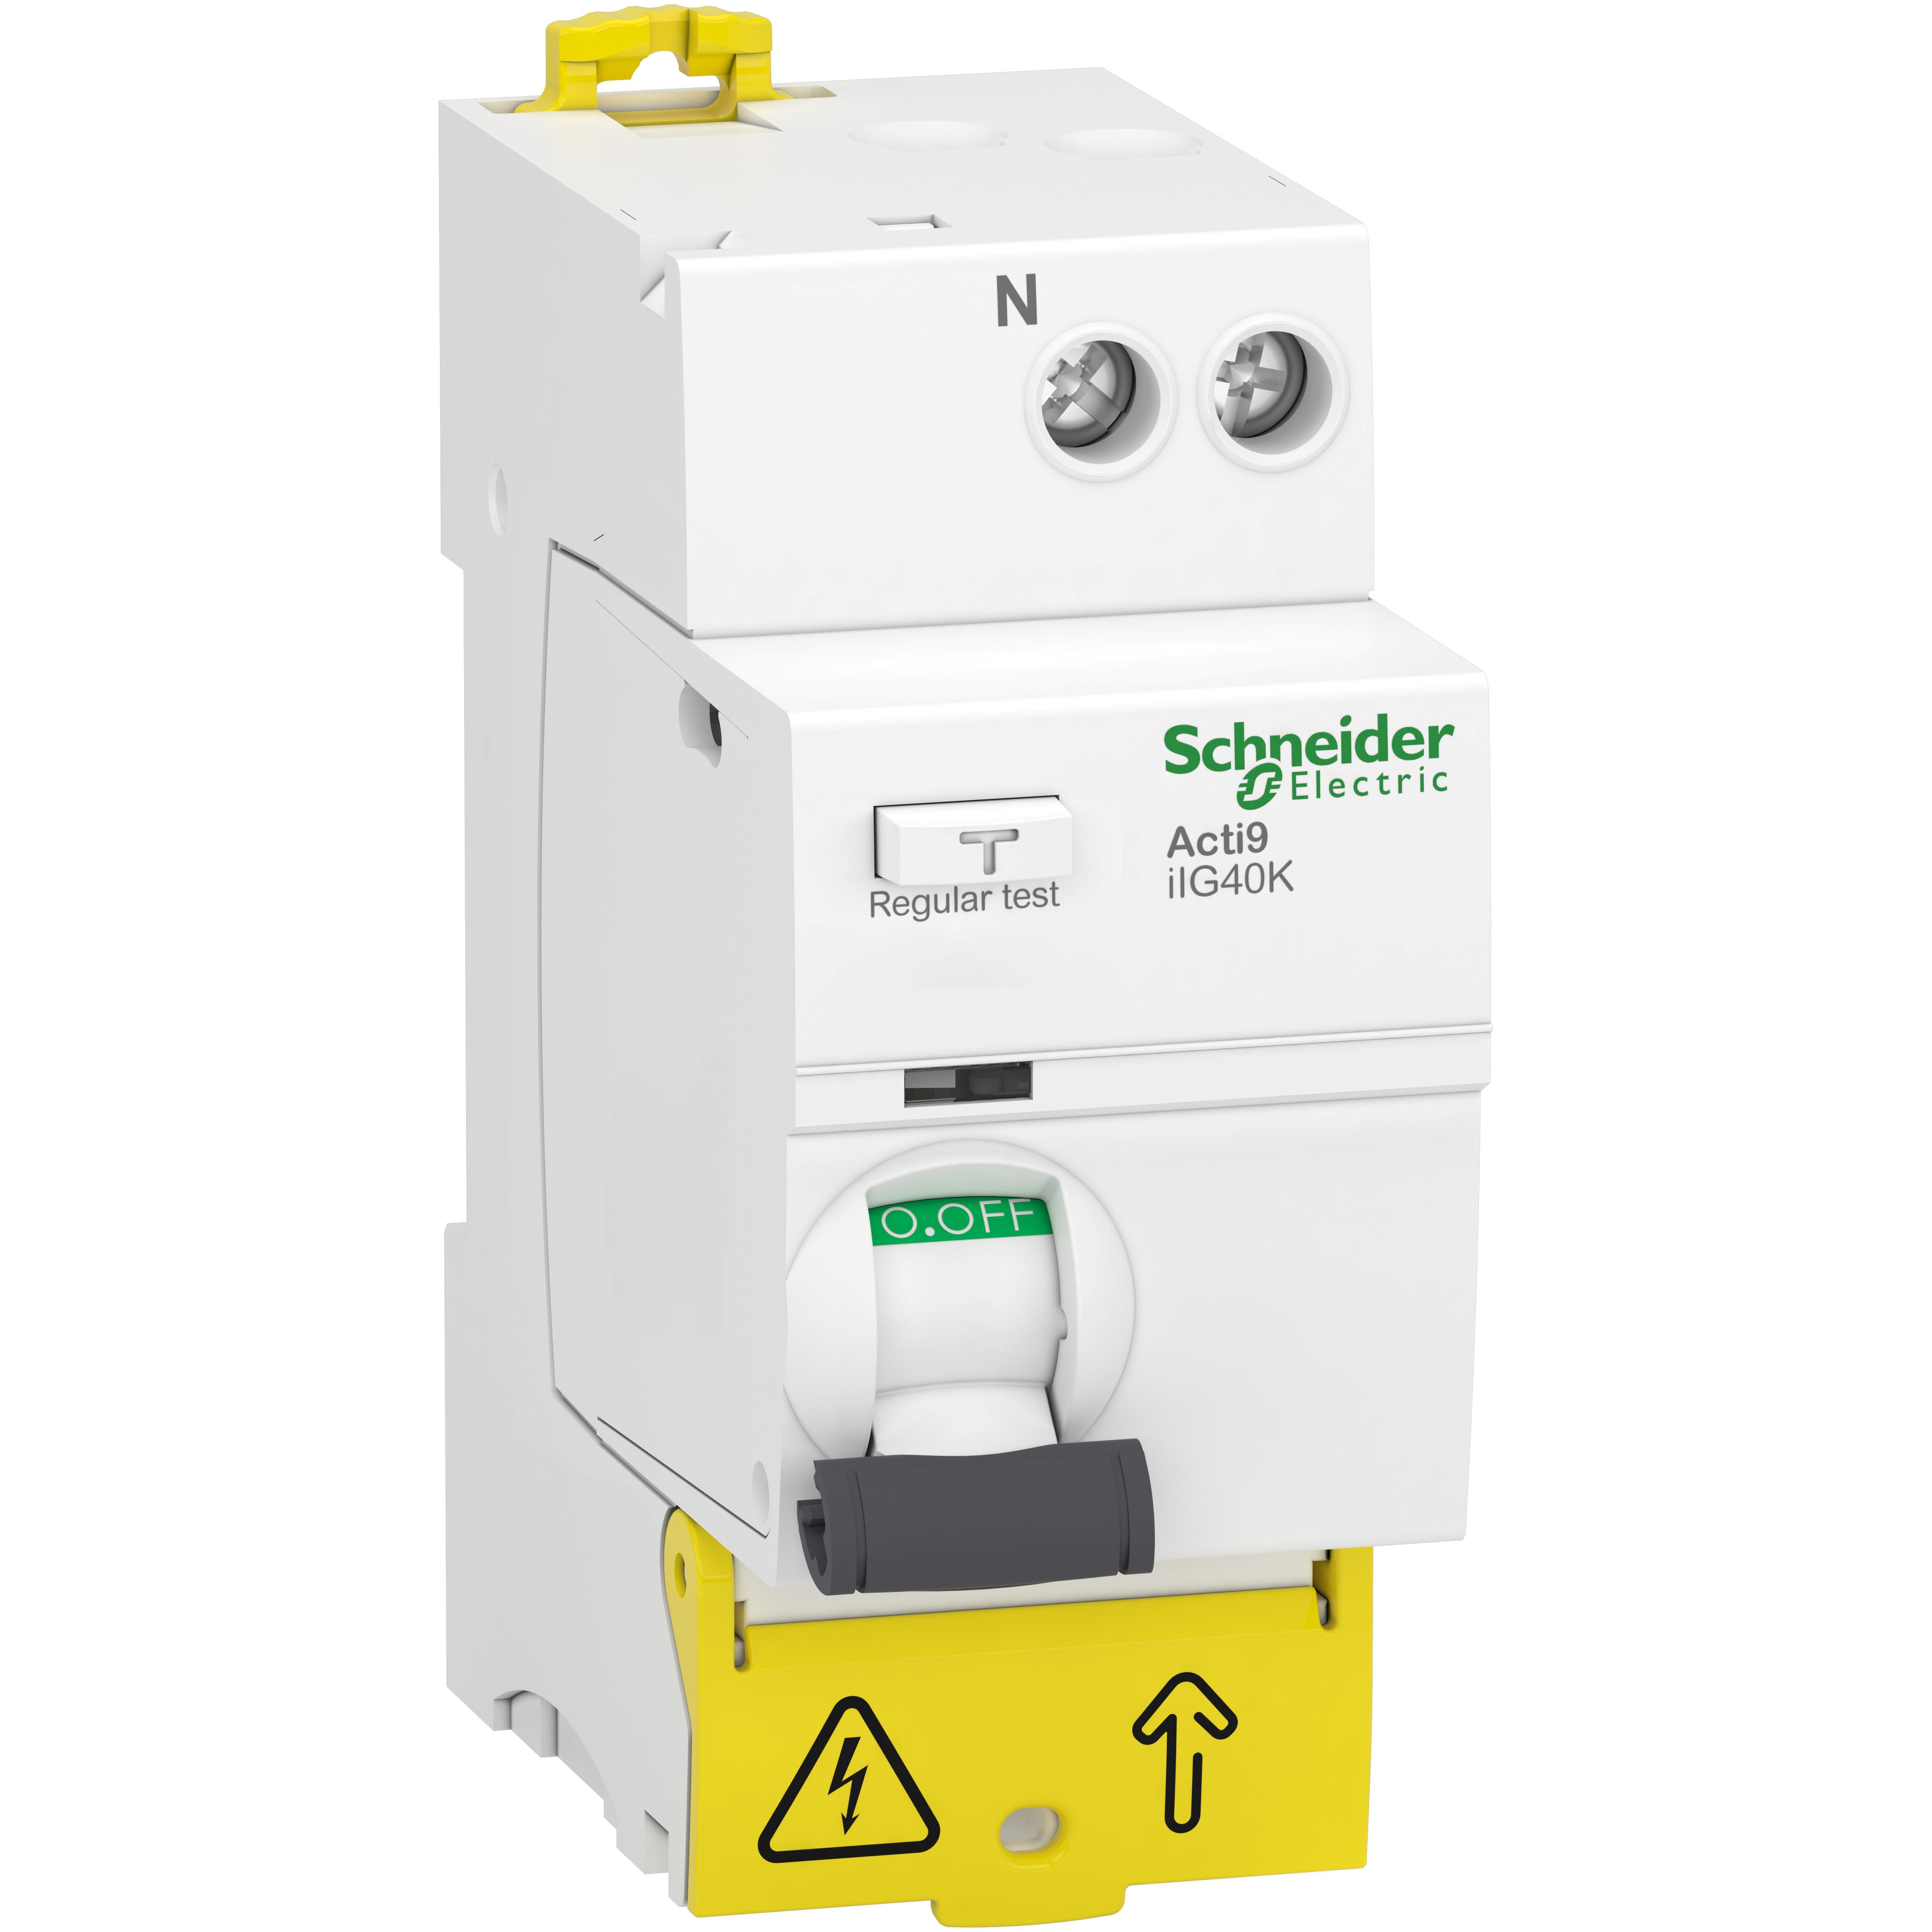 Schneider Electric - Acti9 iIG40K - Inter. diff tete de groupe - 1P+N - 25A - 30mA - Type AC